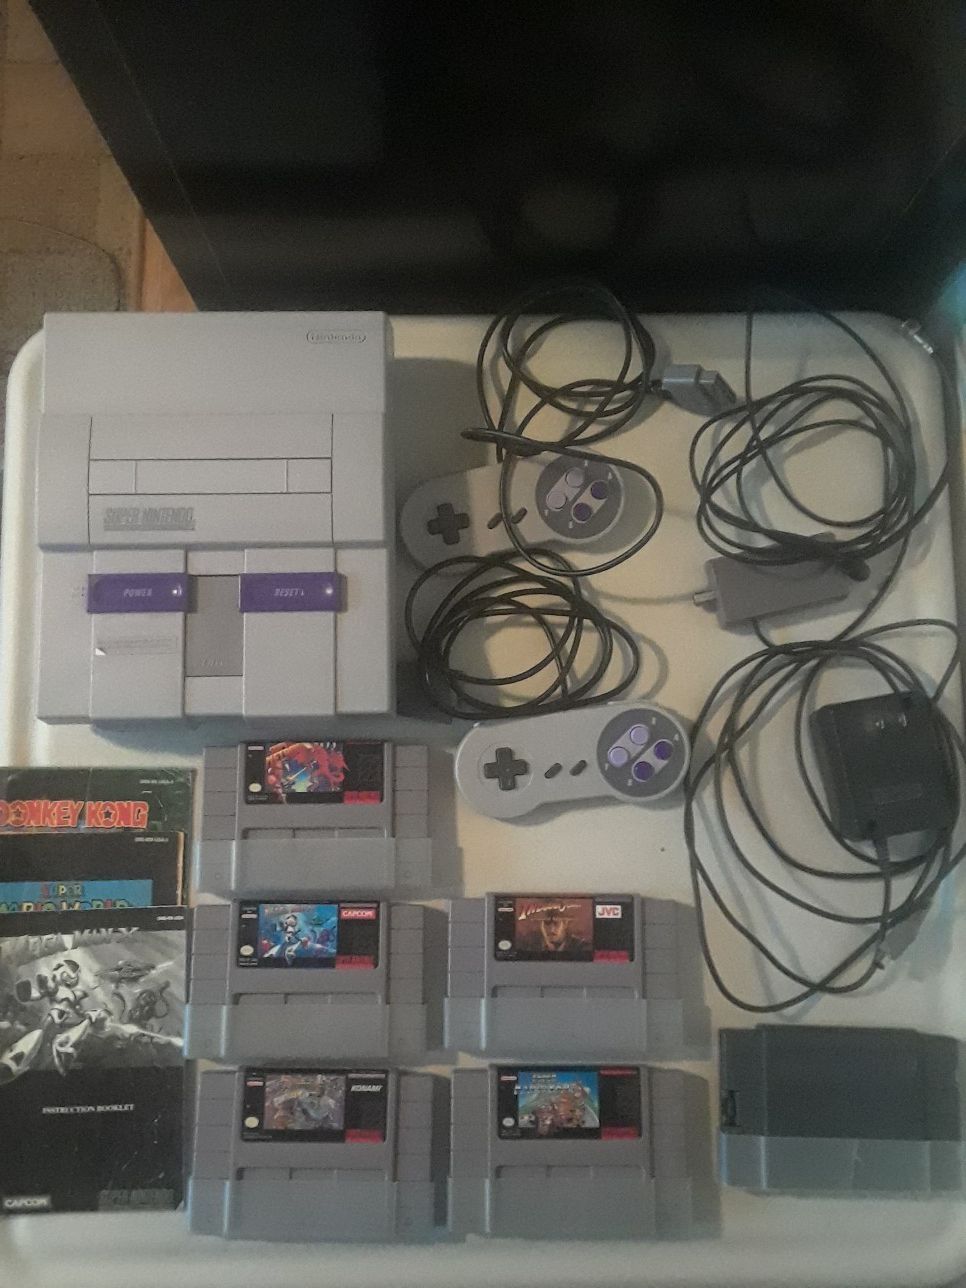 One Owner Super Nintendo SNES Complete Setup with Cords, Games, and TV